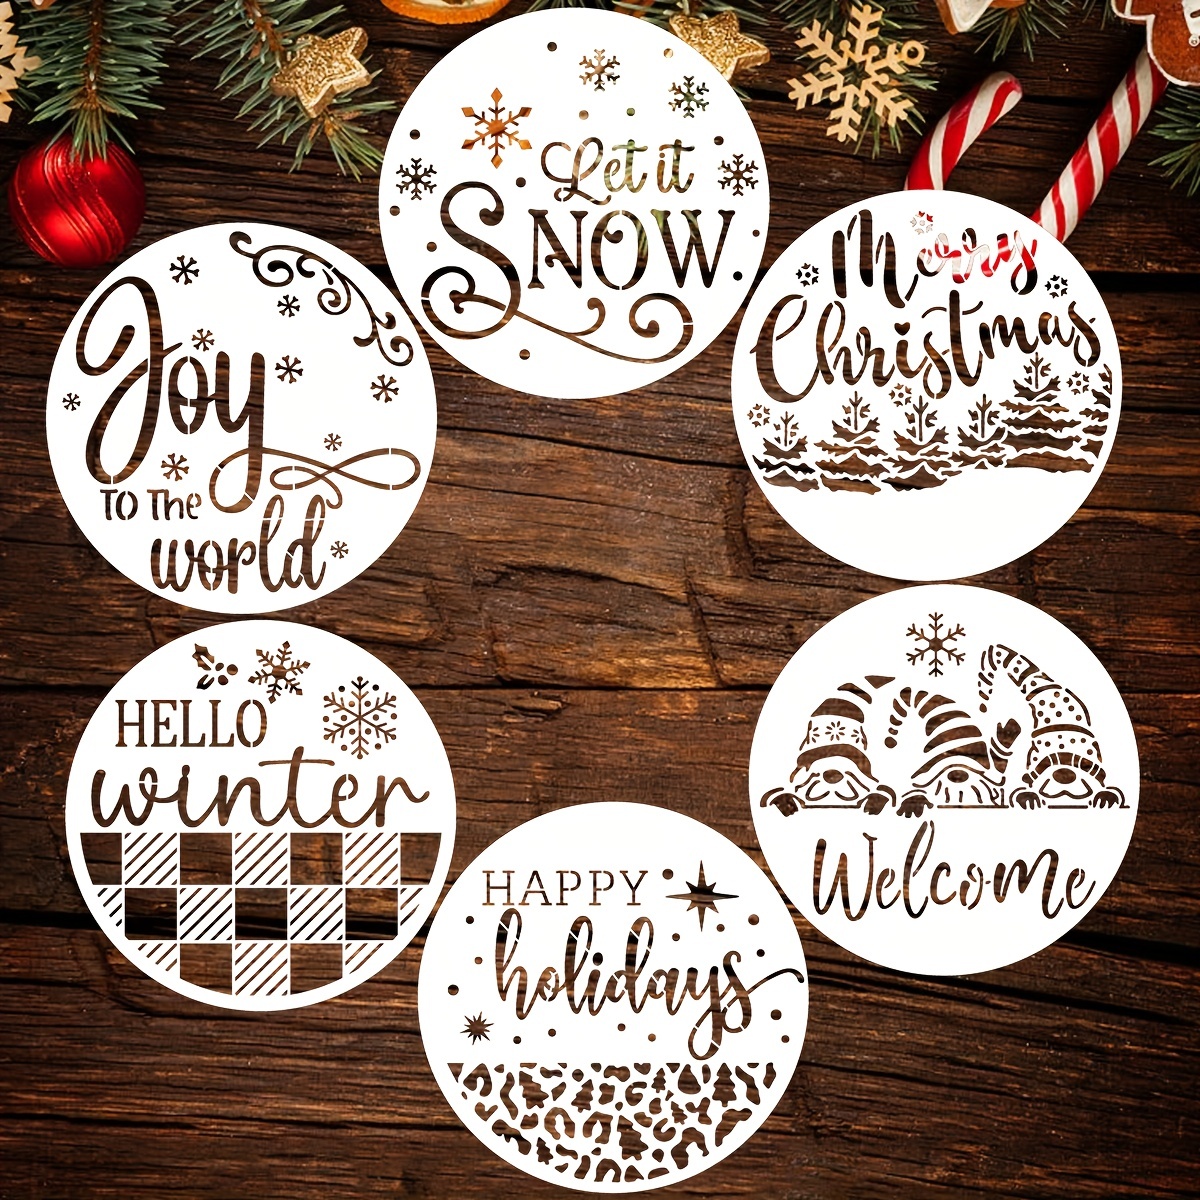 Christmas Stencils for Painting, Reusable Stencils: Believe, Merry  Christmas, Joy, Let it Snow for Unique Winter Signs